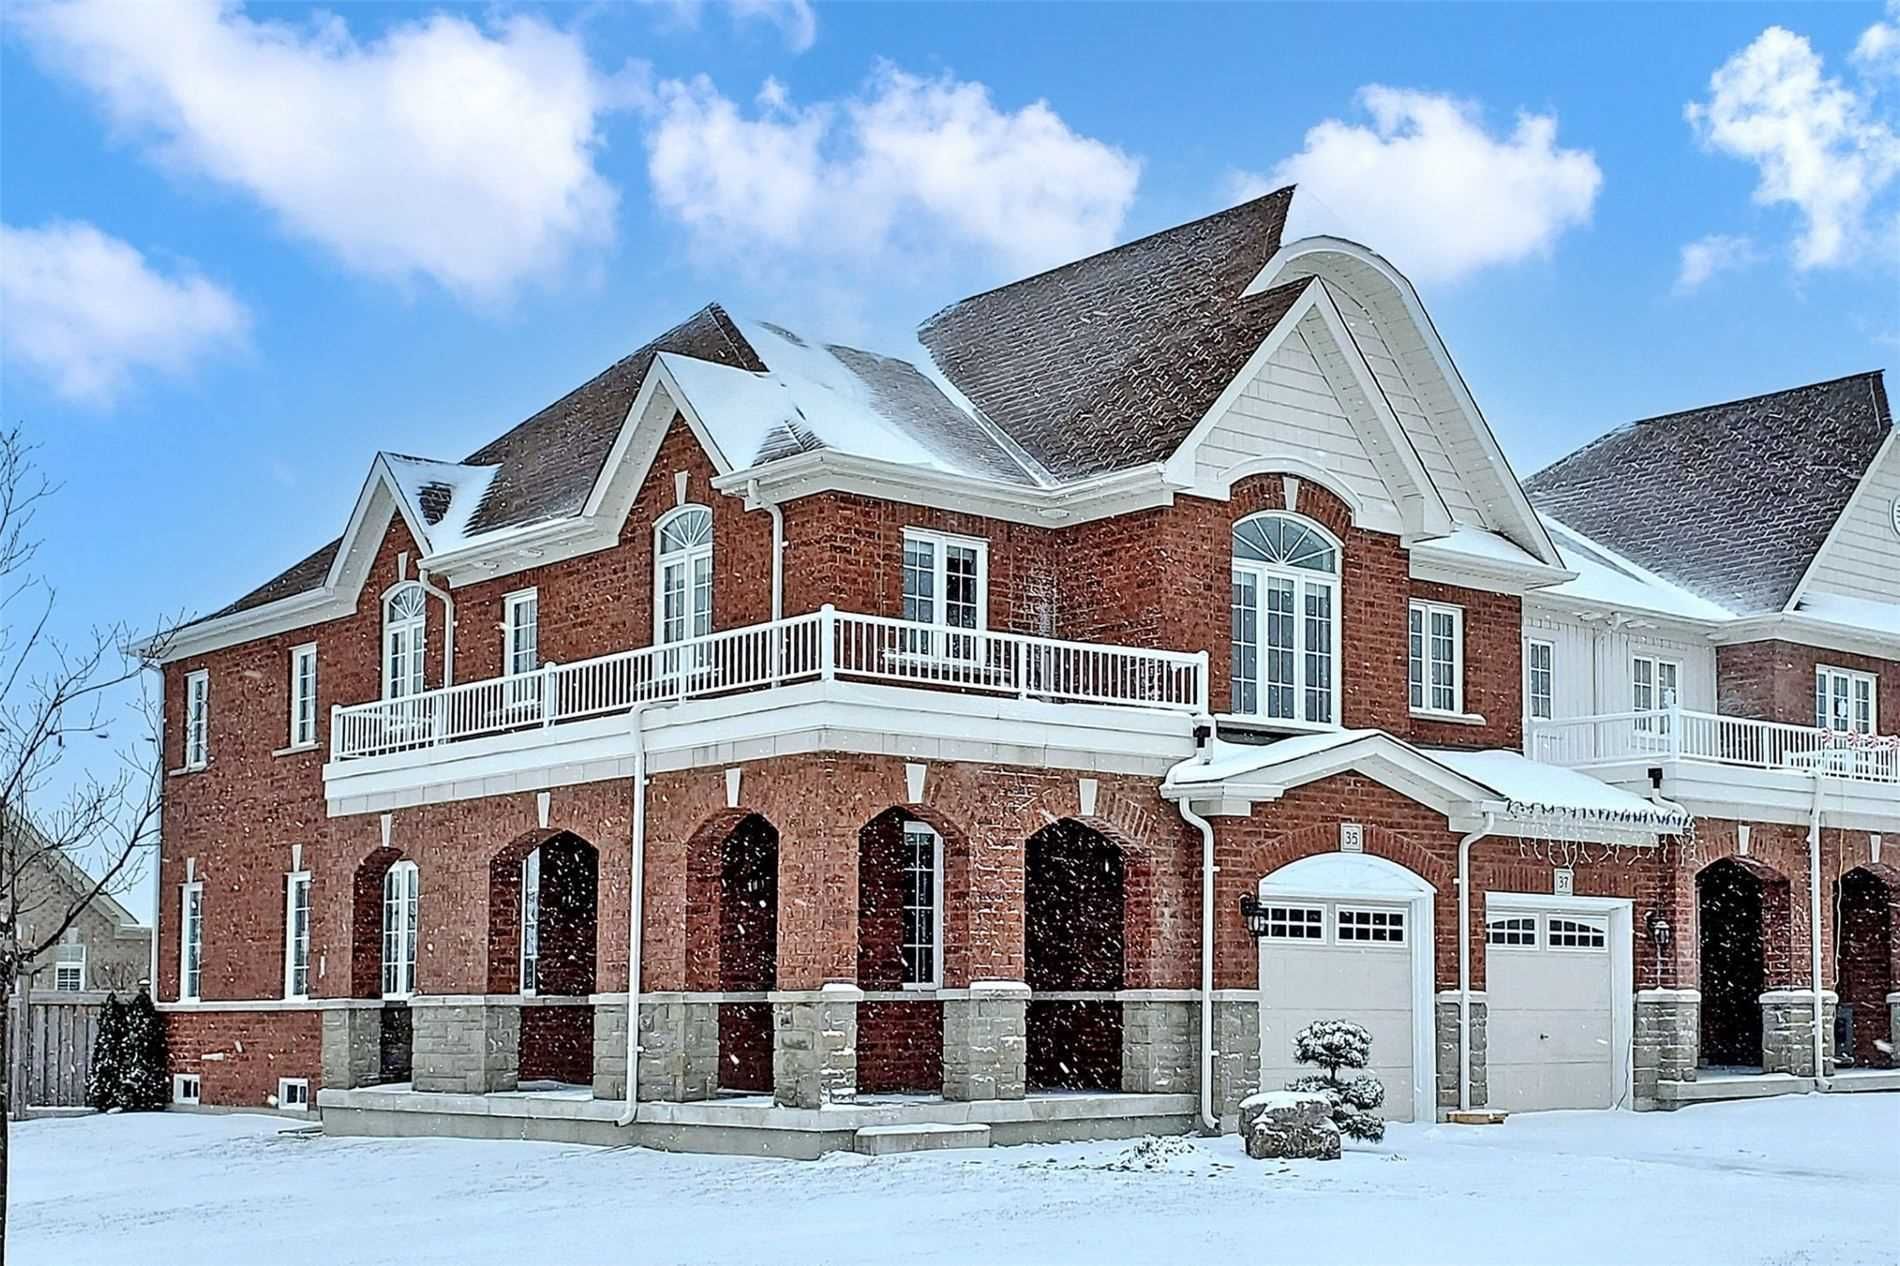 New property listed in Bowmanville, Clarington